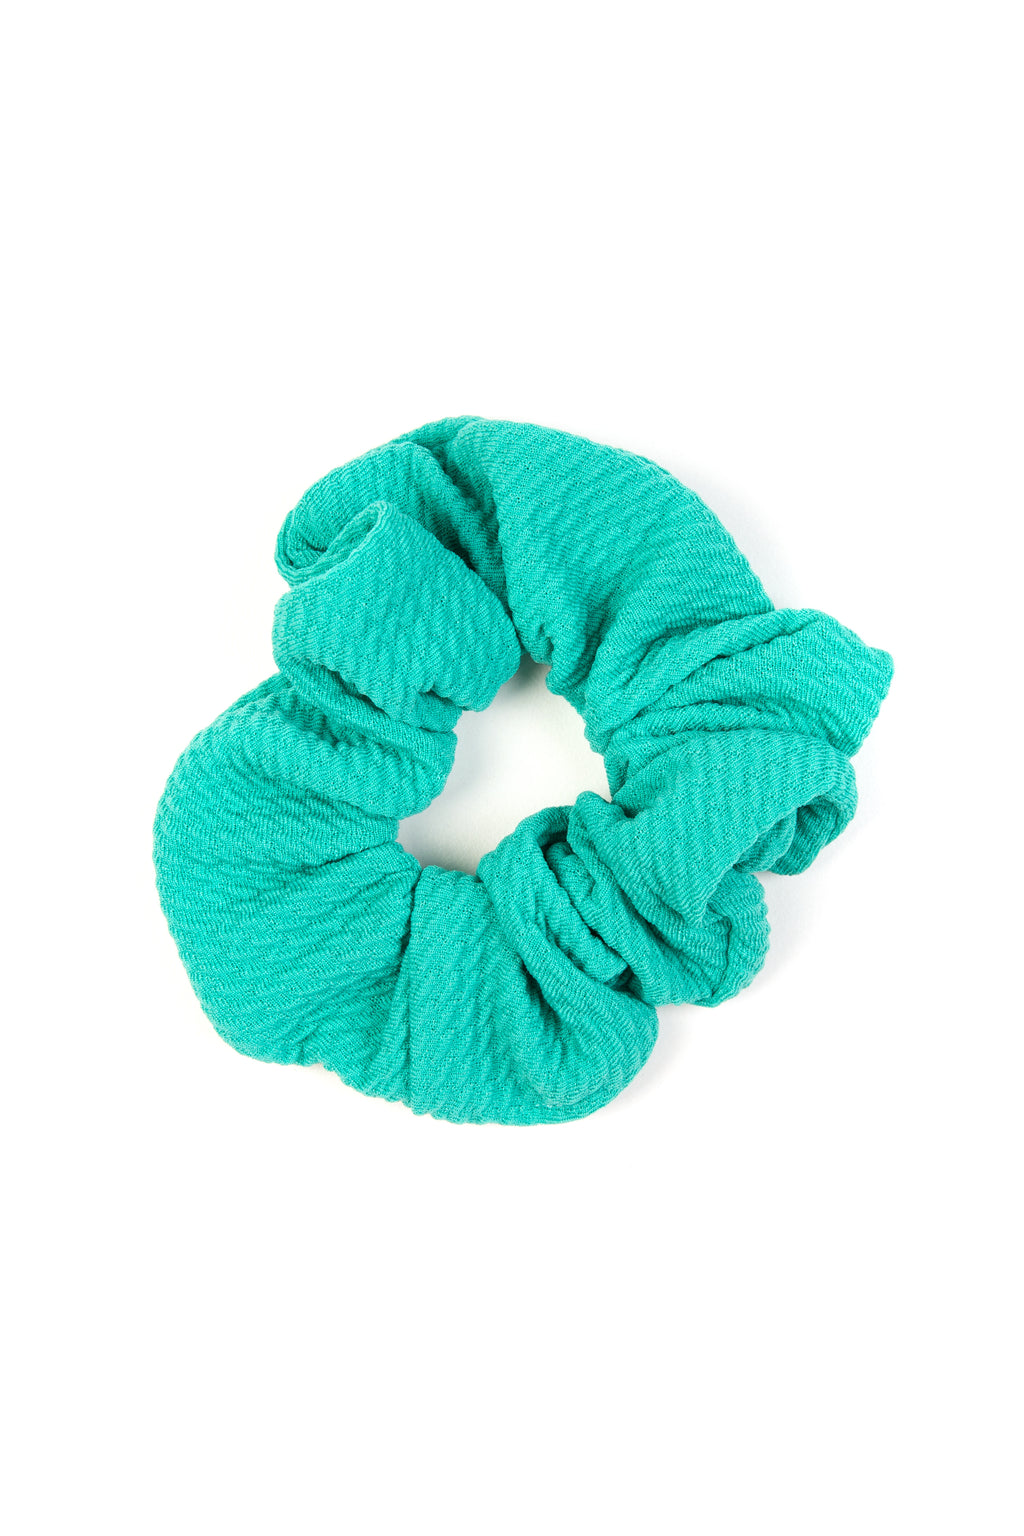 The Turquoise Scrunchie